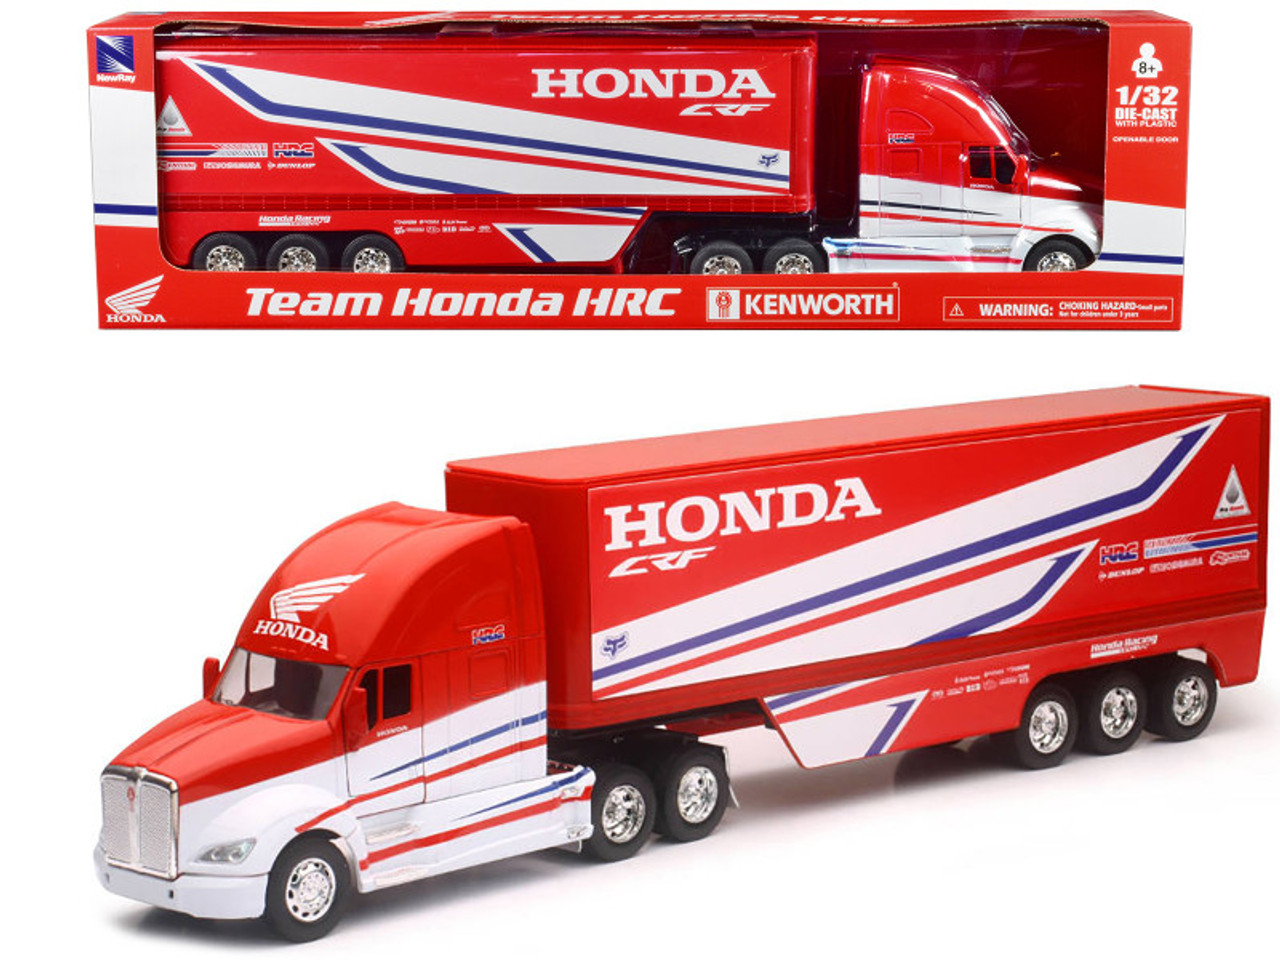 Kenworth Semi-Truck Red and White "Team Honda HRC" 1/32 Diecast Model by New Ray